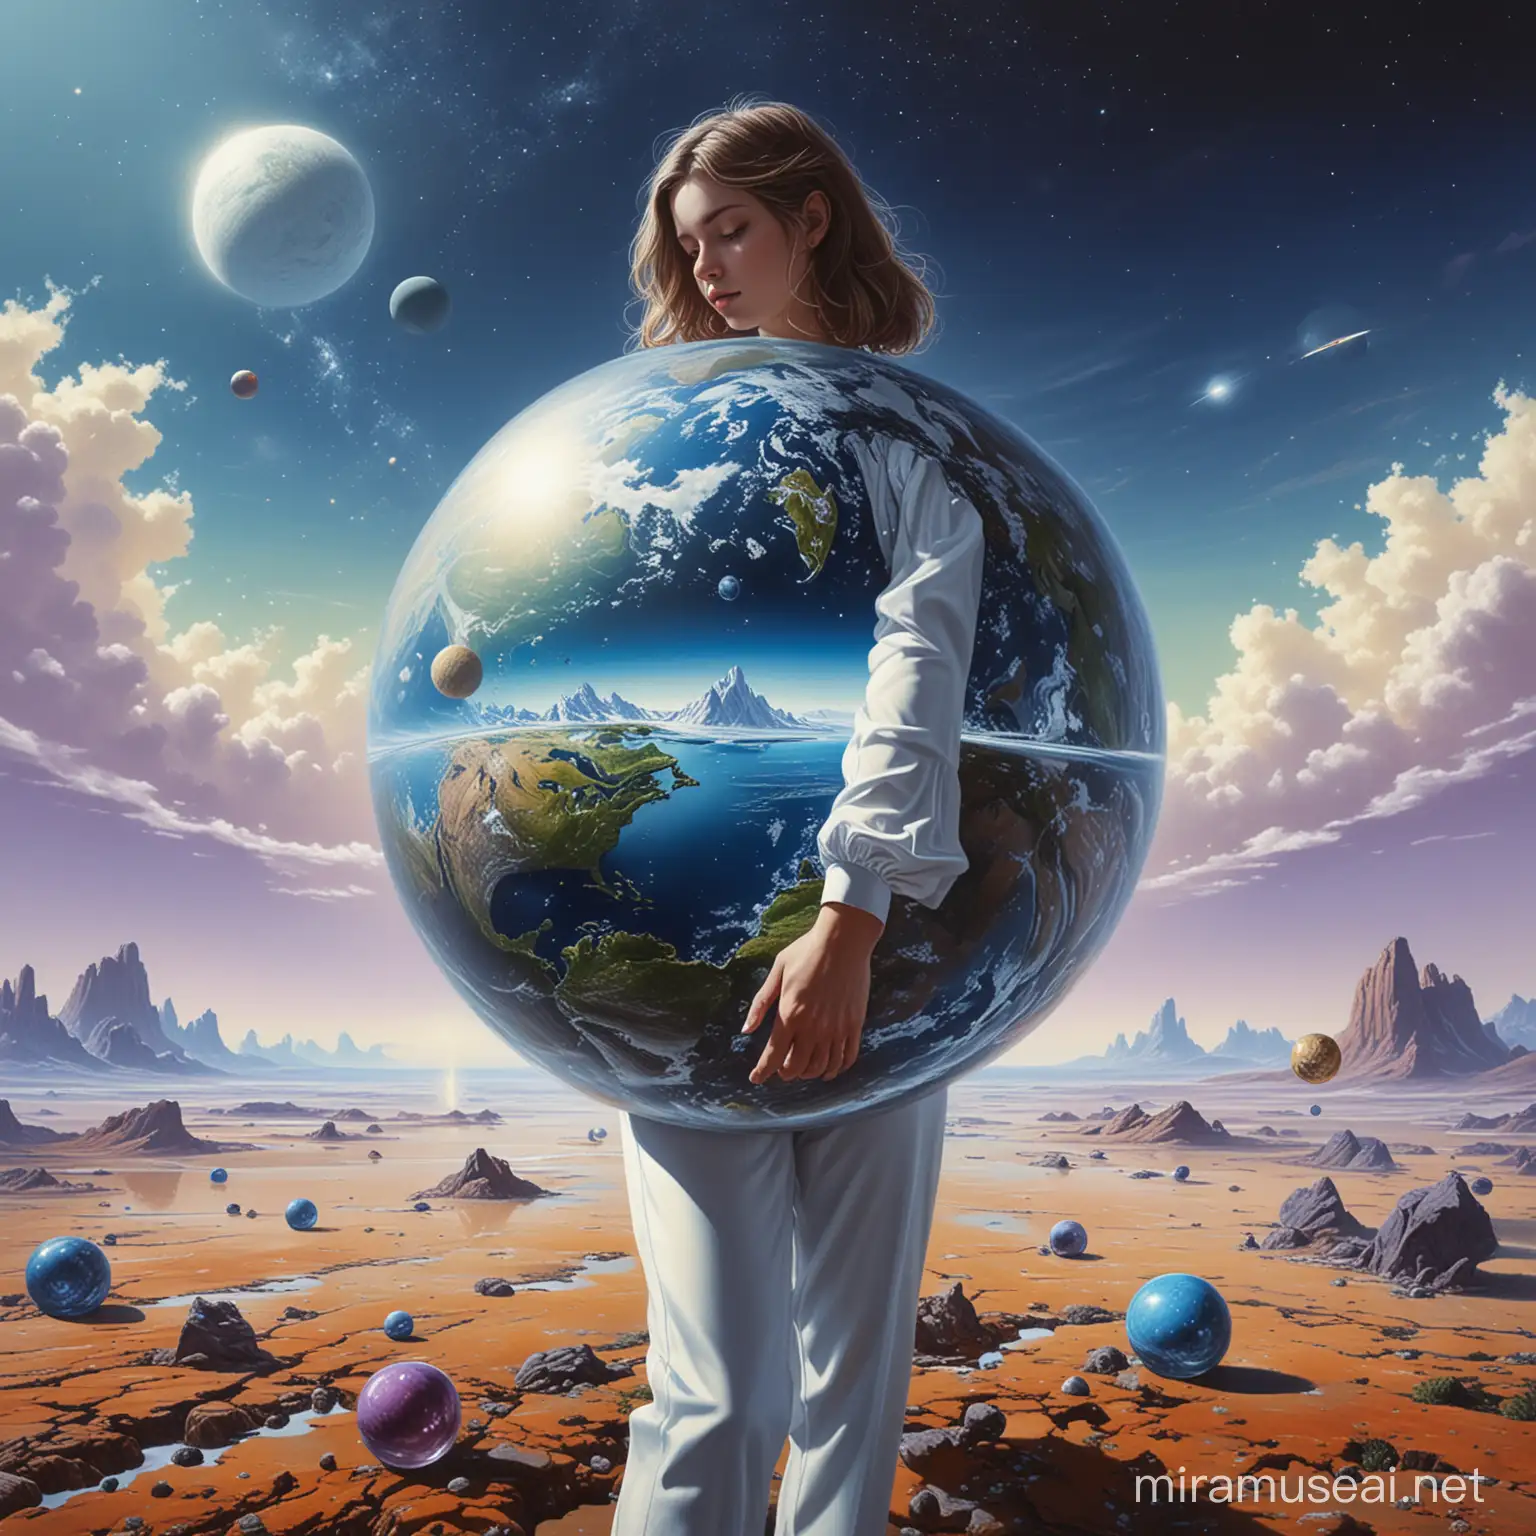 A photo-realistic surrealistic painting in the style of Jean Daprai.
It should contain a clairvoyant girl full size as foreground, facing toward us, in a blue and white simple tight suite, the suite is in a 60's style, without decoration or ornaments, floating in infinite space,
in her hands she is holding the earth, instead of a crystal ball.
The background should contain other planets, in different colors (orange, yellow, green, purple, 
Add a abstract symbol of love on the right side of the background,
Add a abstract symbol of peace on the right side of the background,planets, Leica R,
